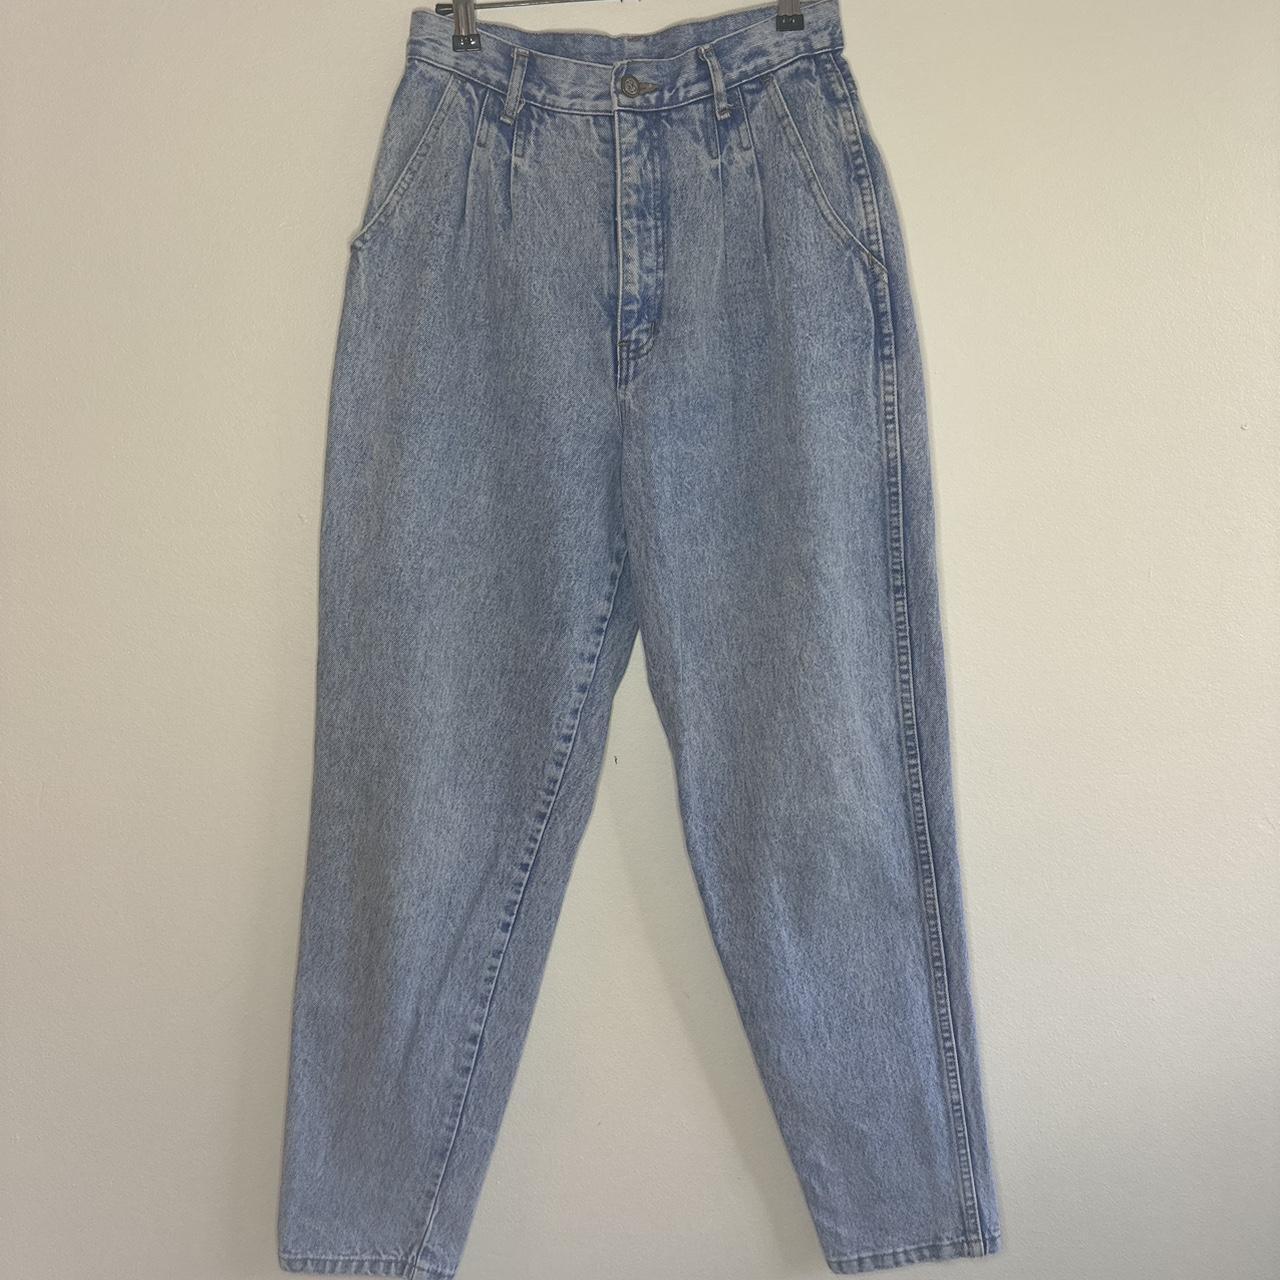 item listed by ozzythrift